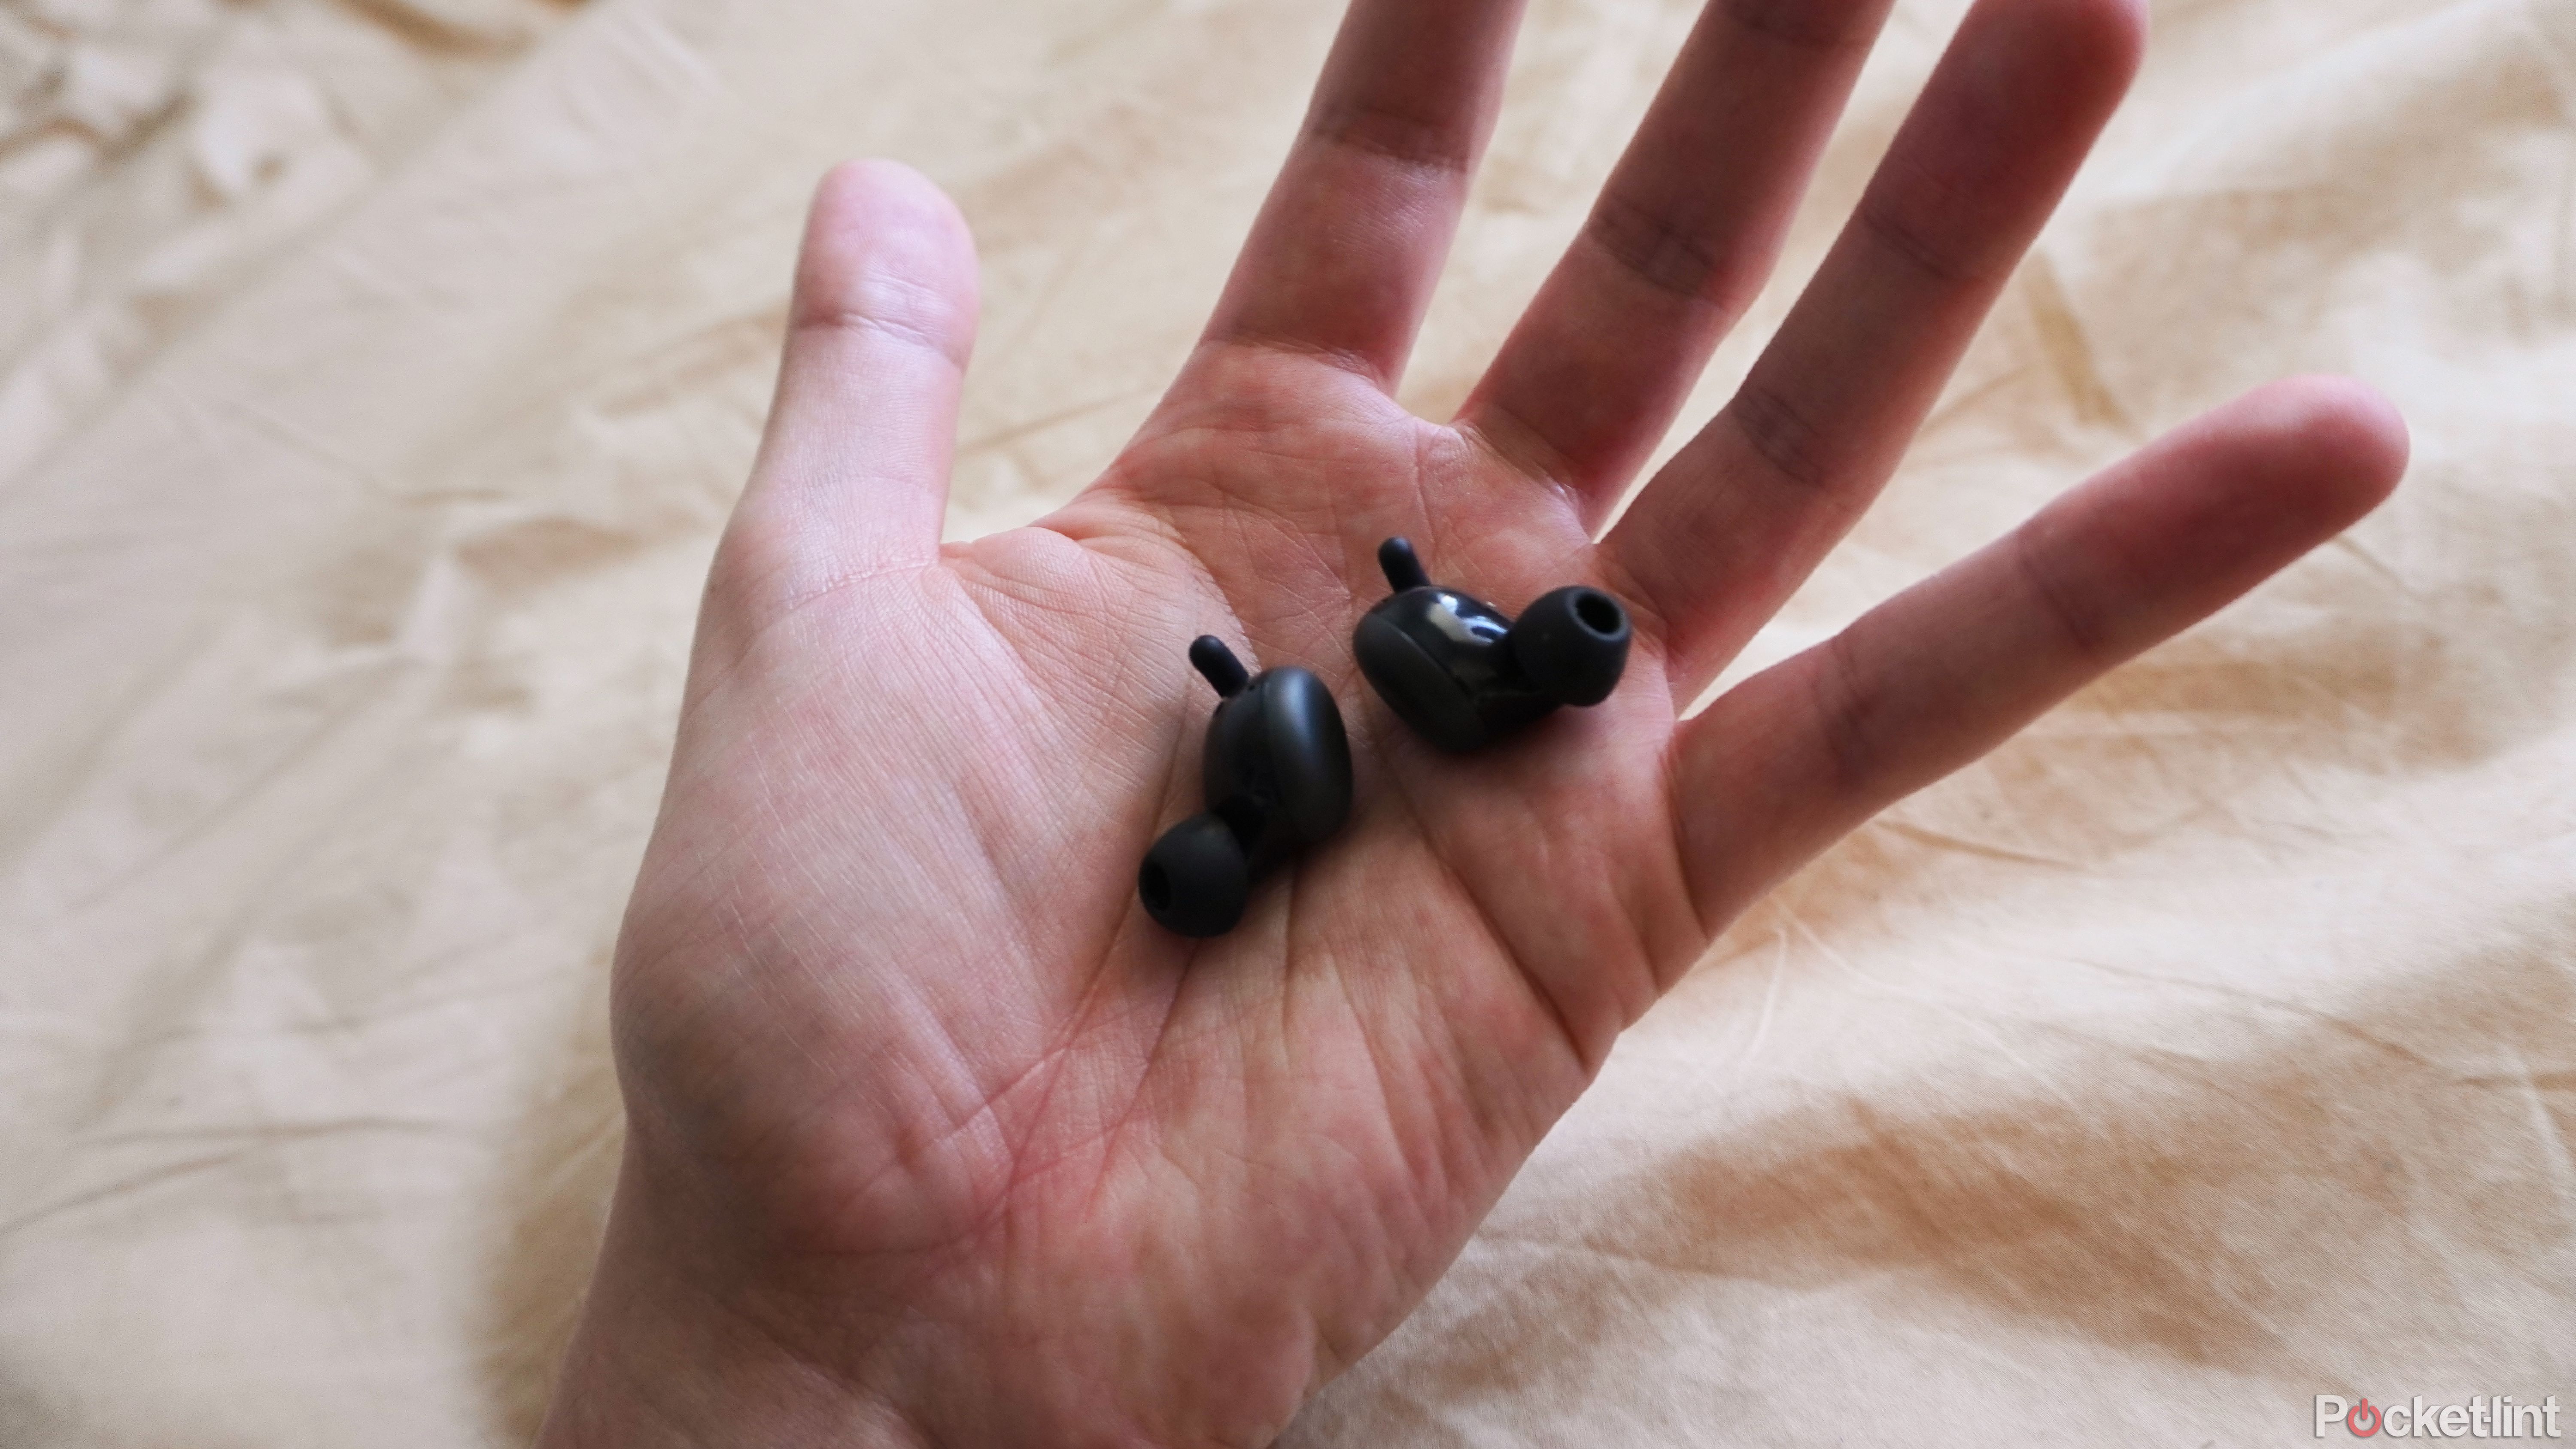 Two Pixel Buds with ear tips and flexible wings visible.